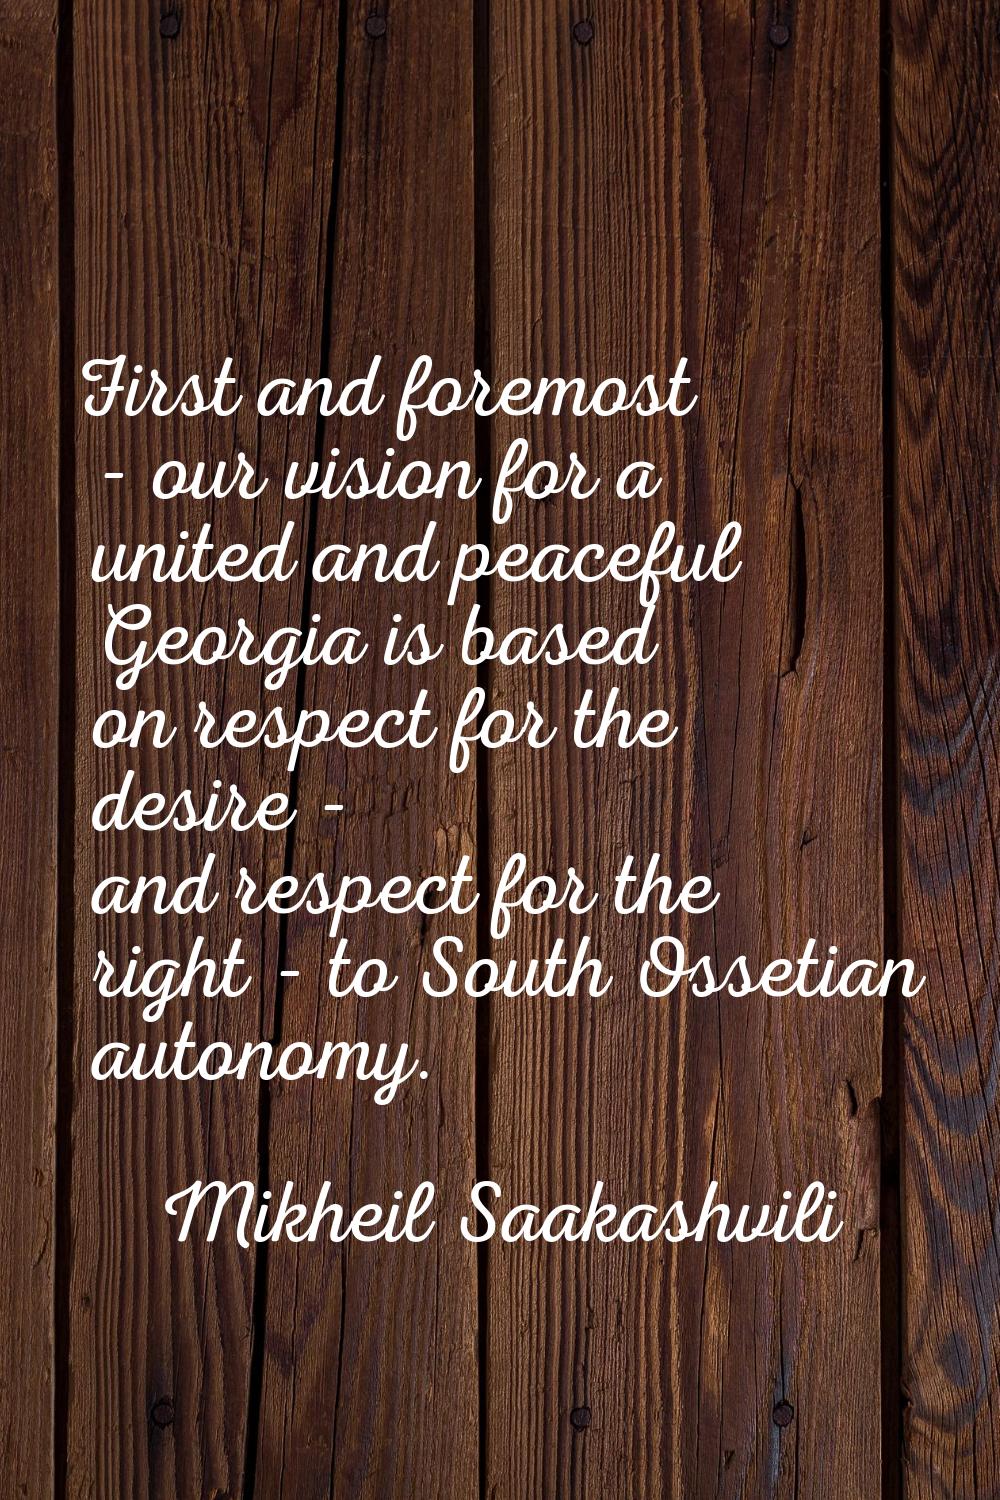 First and foremost - our vision for a united and peaceful Georgia is based on respect for the desir